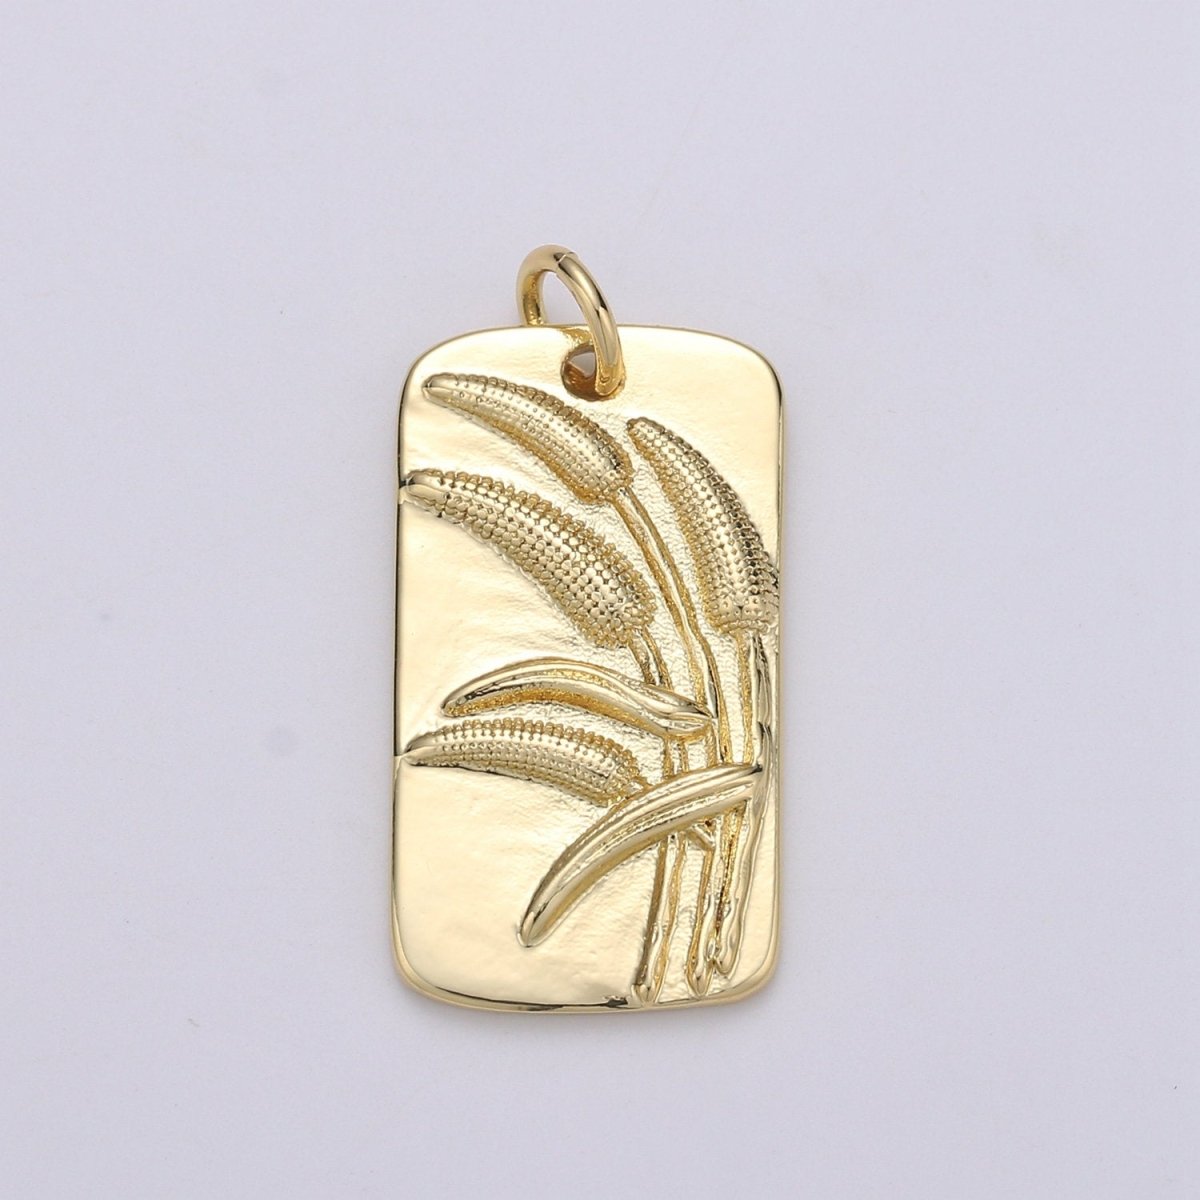 Wild Flower Charms, Gold Flower Pendant, Dainty Flower Charm, Small Tag Charm for Necklace Floral Flower Jewelry in 14k gold filled D-752 - DLUXCA